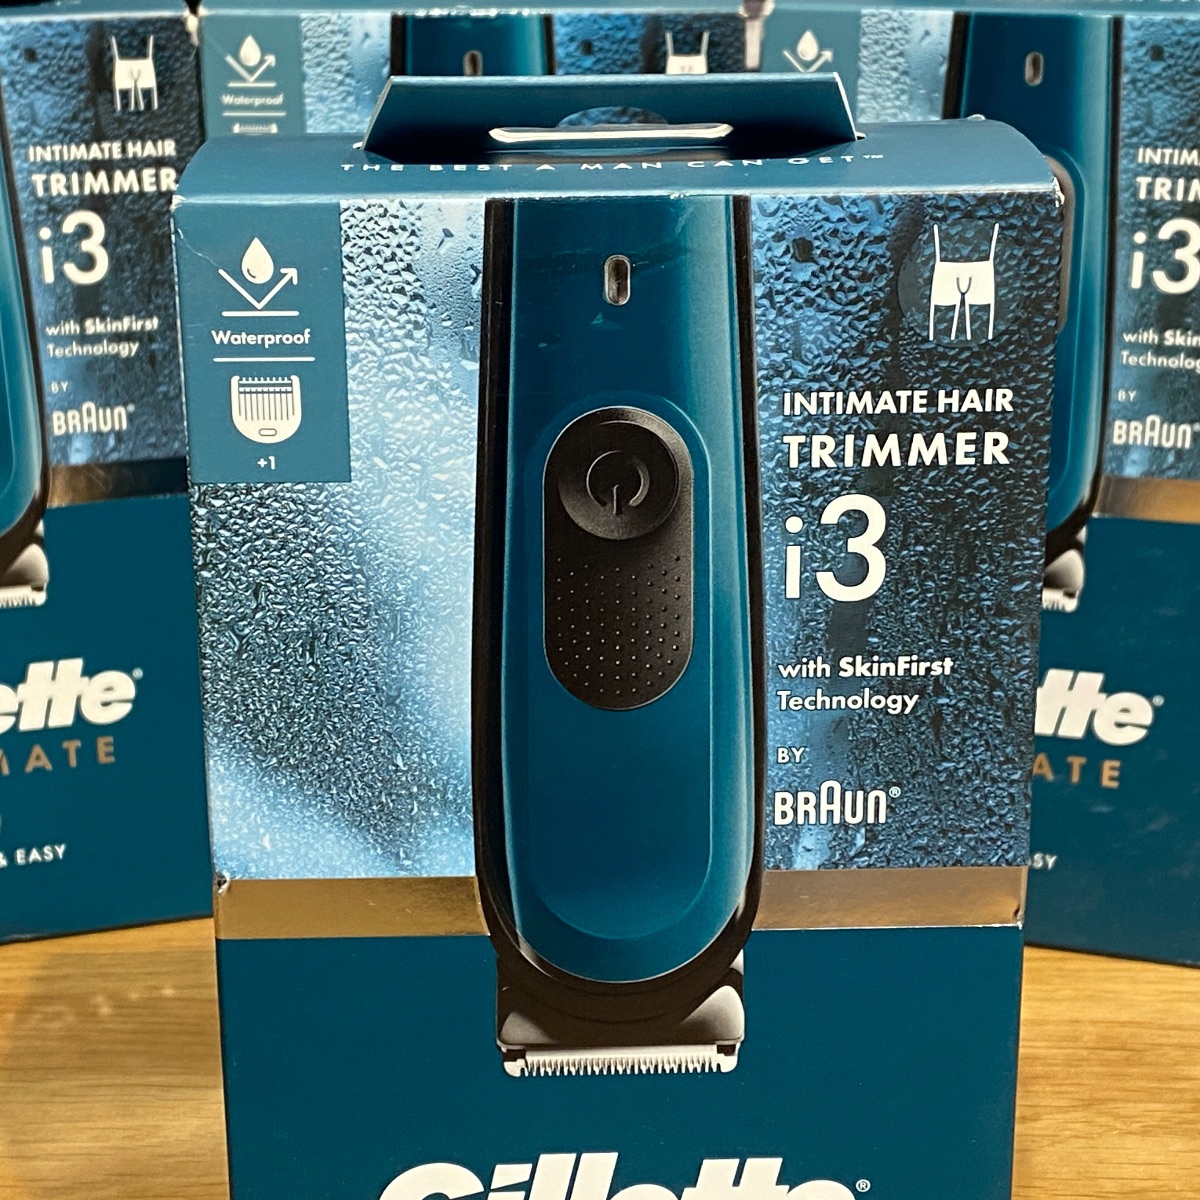 Gillette Intimate Mens Intimate Hair Trimmer i3 Waterproof New and Boxed TRIMMER 8700216074339 (Brand New)